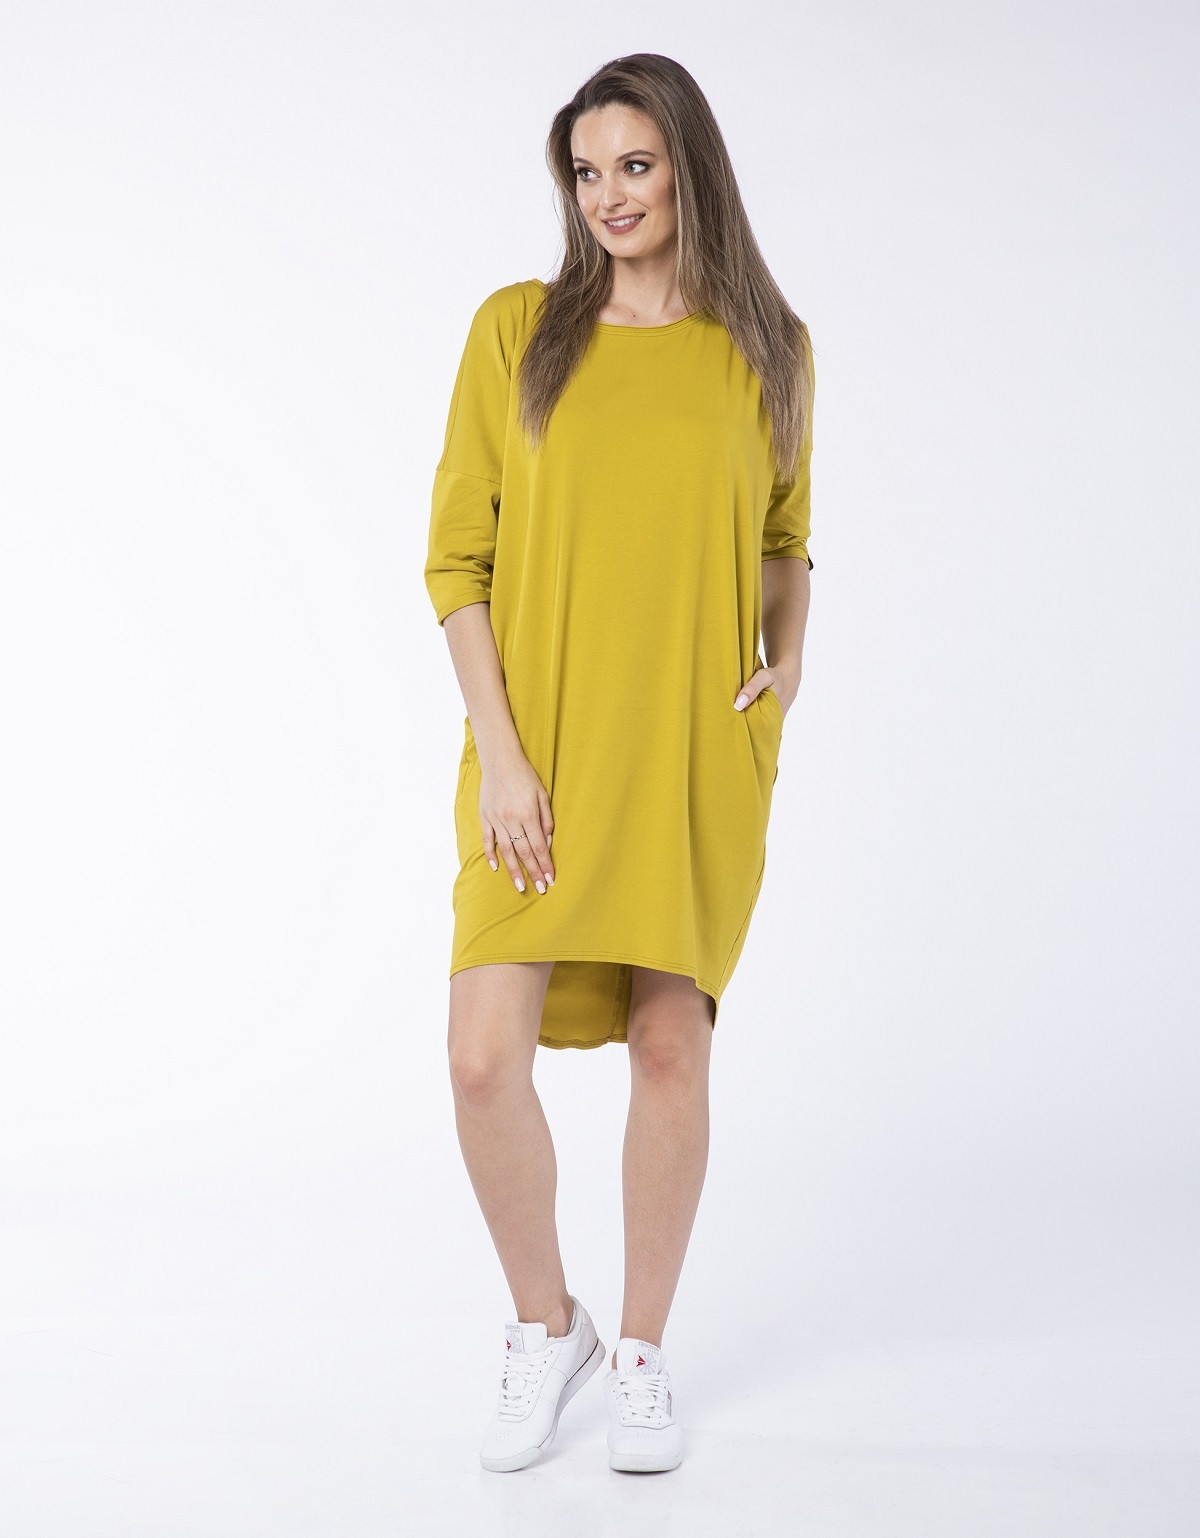 Look Made With Love Šaty 324 Kate Mustard M/L